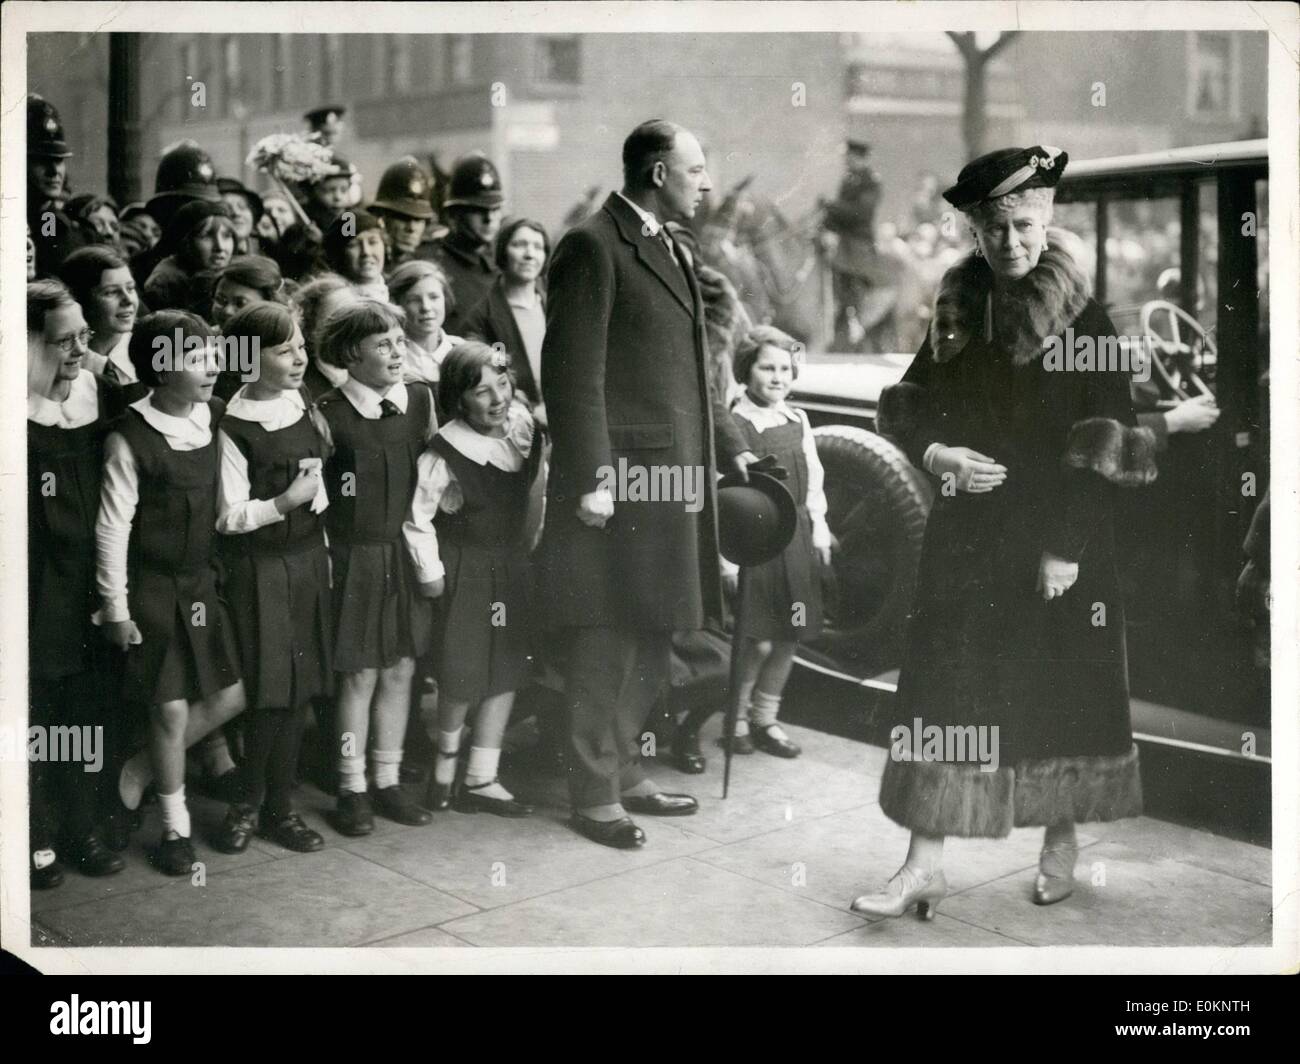 Feb. 02, 1933 - The Queen attends performance at Sadler's Wells; Seven thousand school children lined Rosebery Avenue, E.C. between Finsbury Town Hall, and Sad;er's Well Theater this afternoon, when the Queen paid a visit to the Theater for the special performance of ''The Merchant of Venice''. Photo Shows The Queen arriving at Sadler's Wells watched by Schoolchildren. Stock Photo